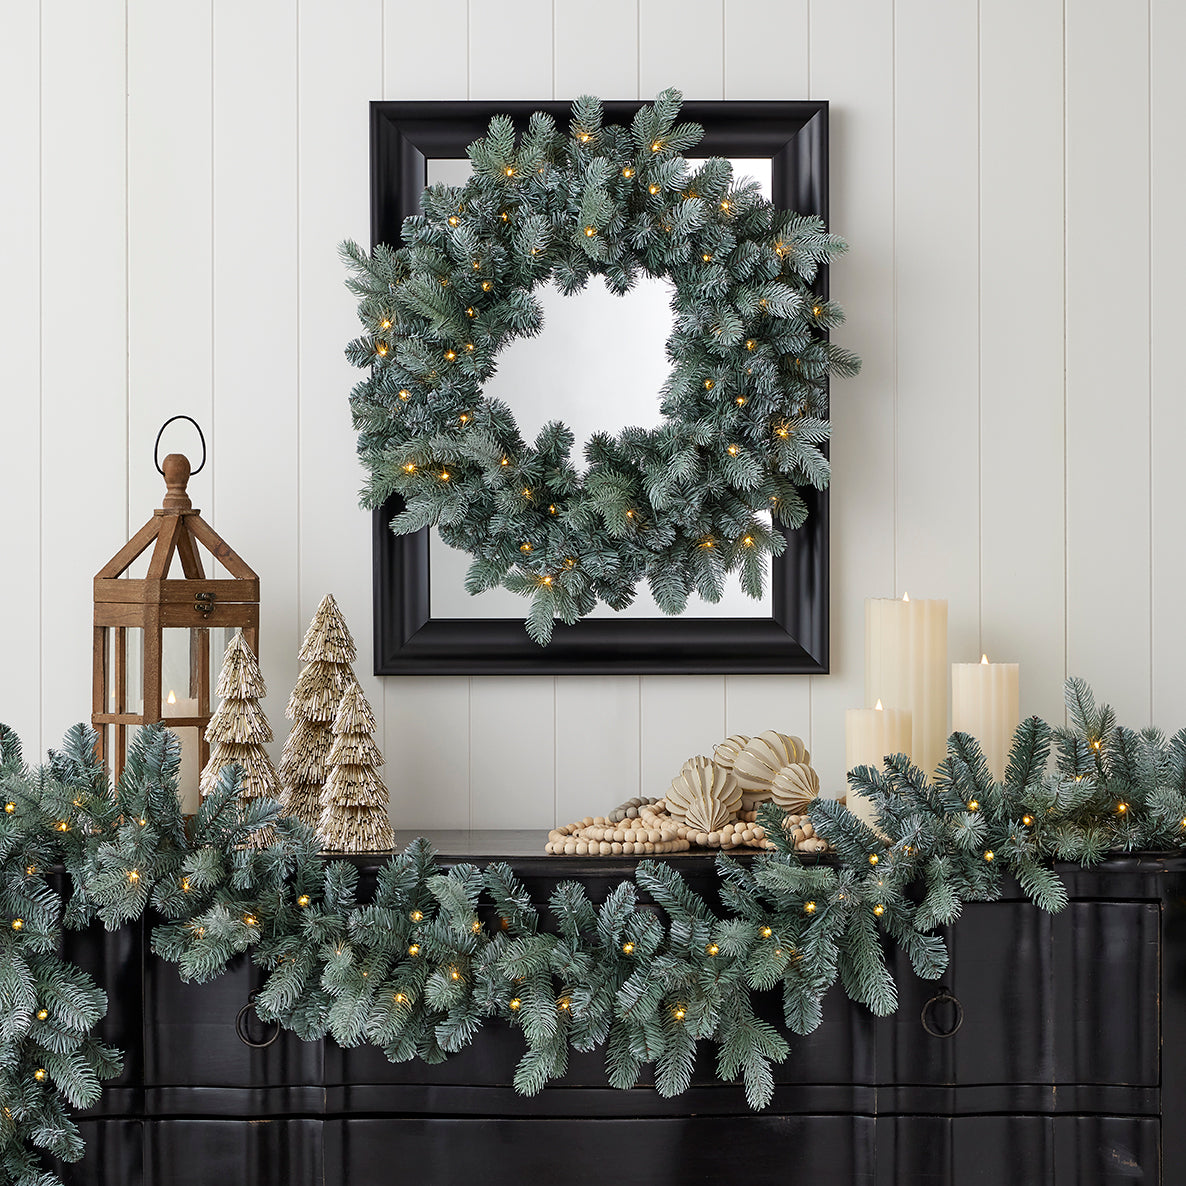 Blue Spruce 24in Wreath with Warm White LED Lights (Battery-Operated)